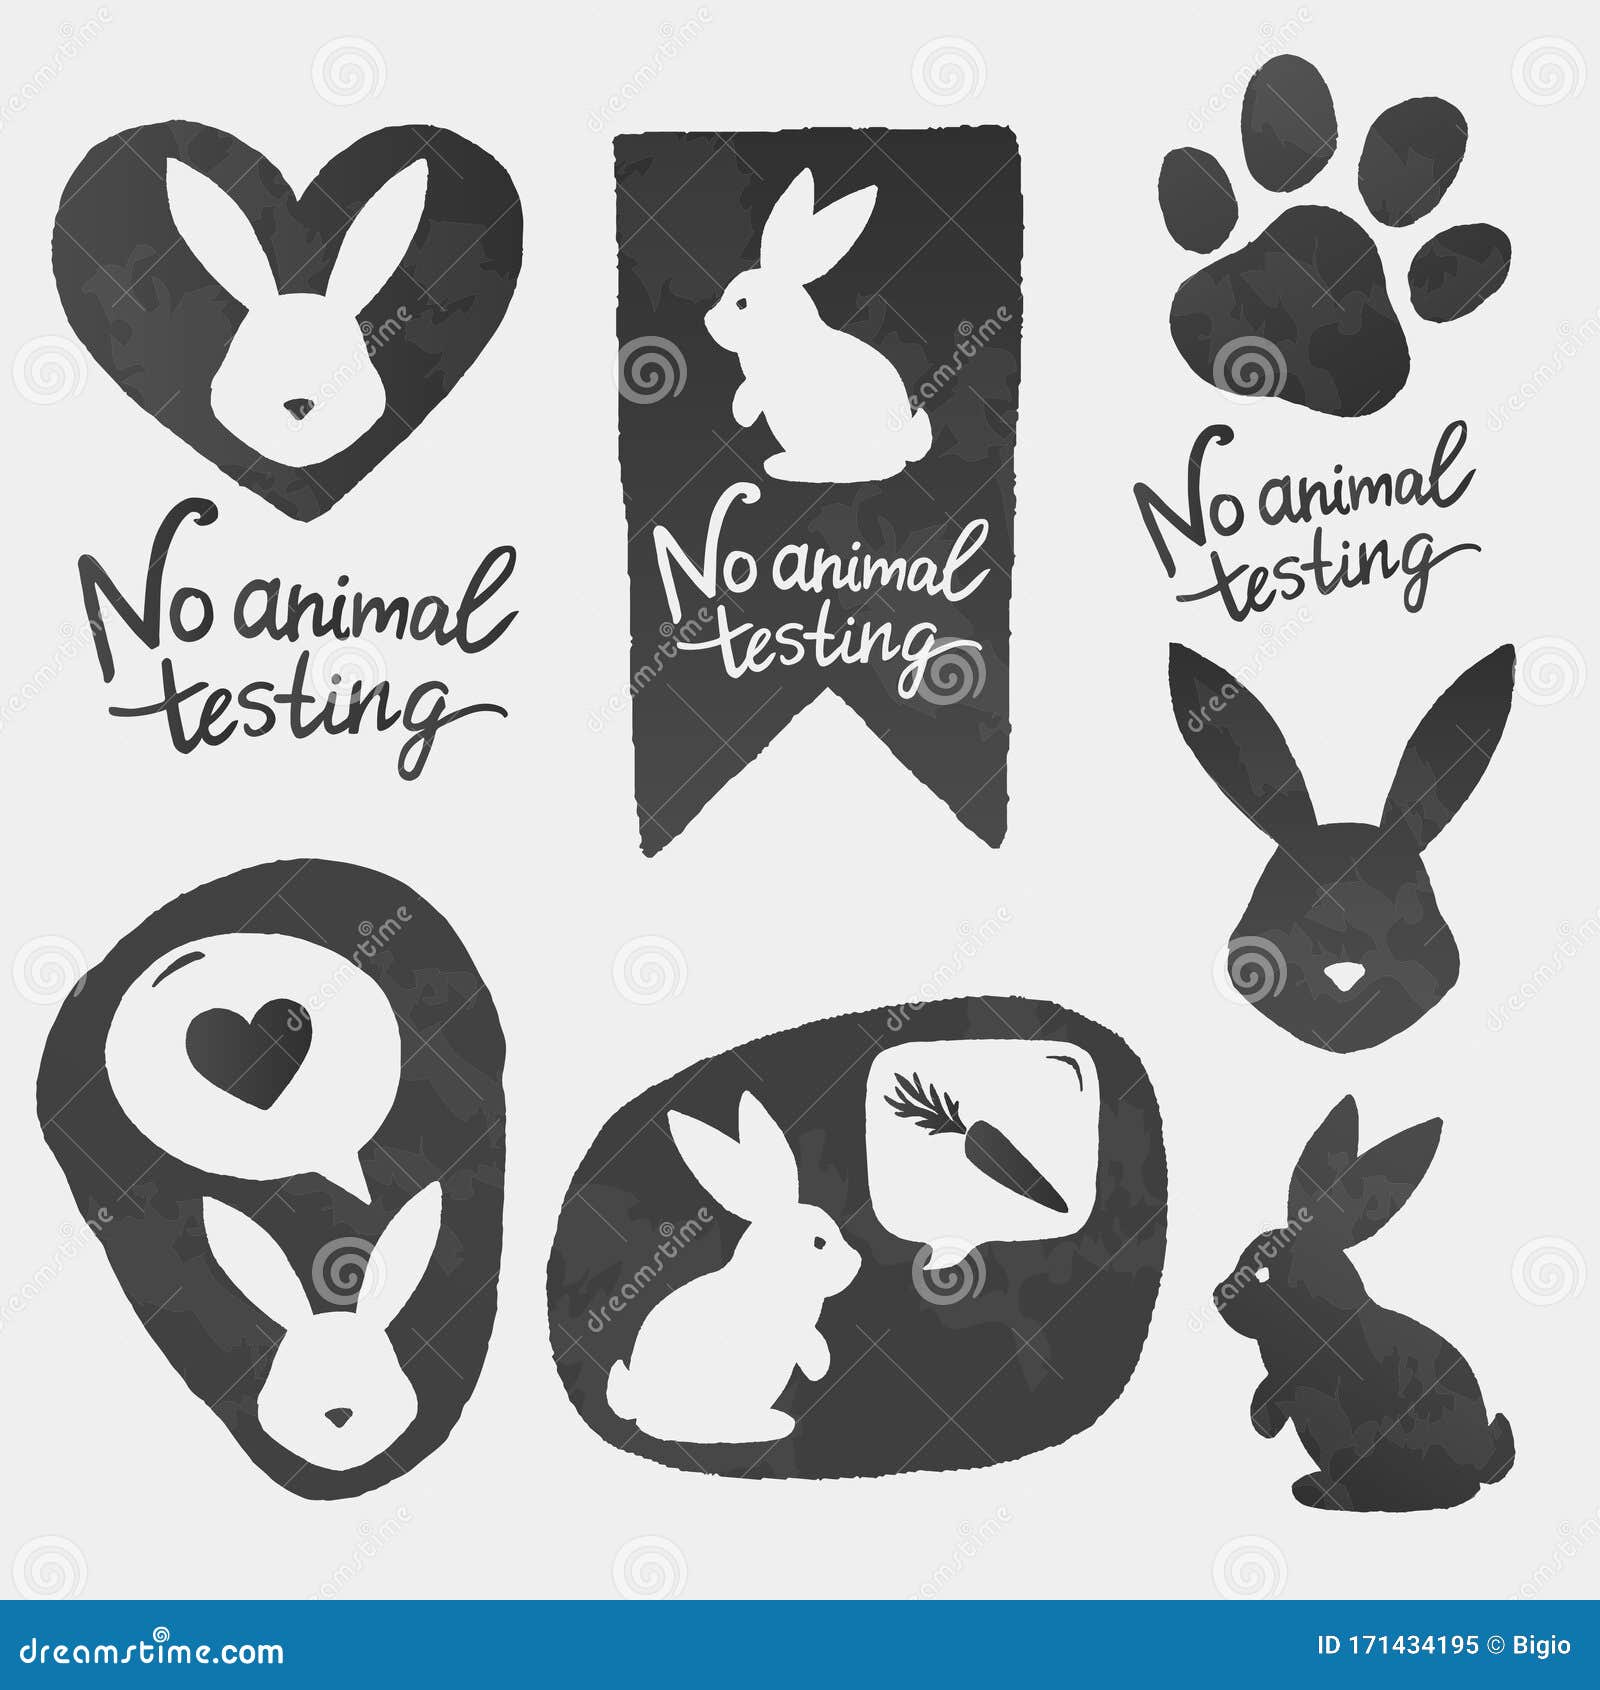 Download Against Animal Testing Stickers. Cruelty Free Vector ...